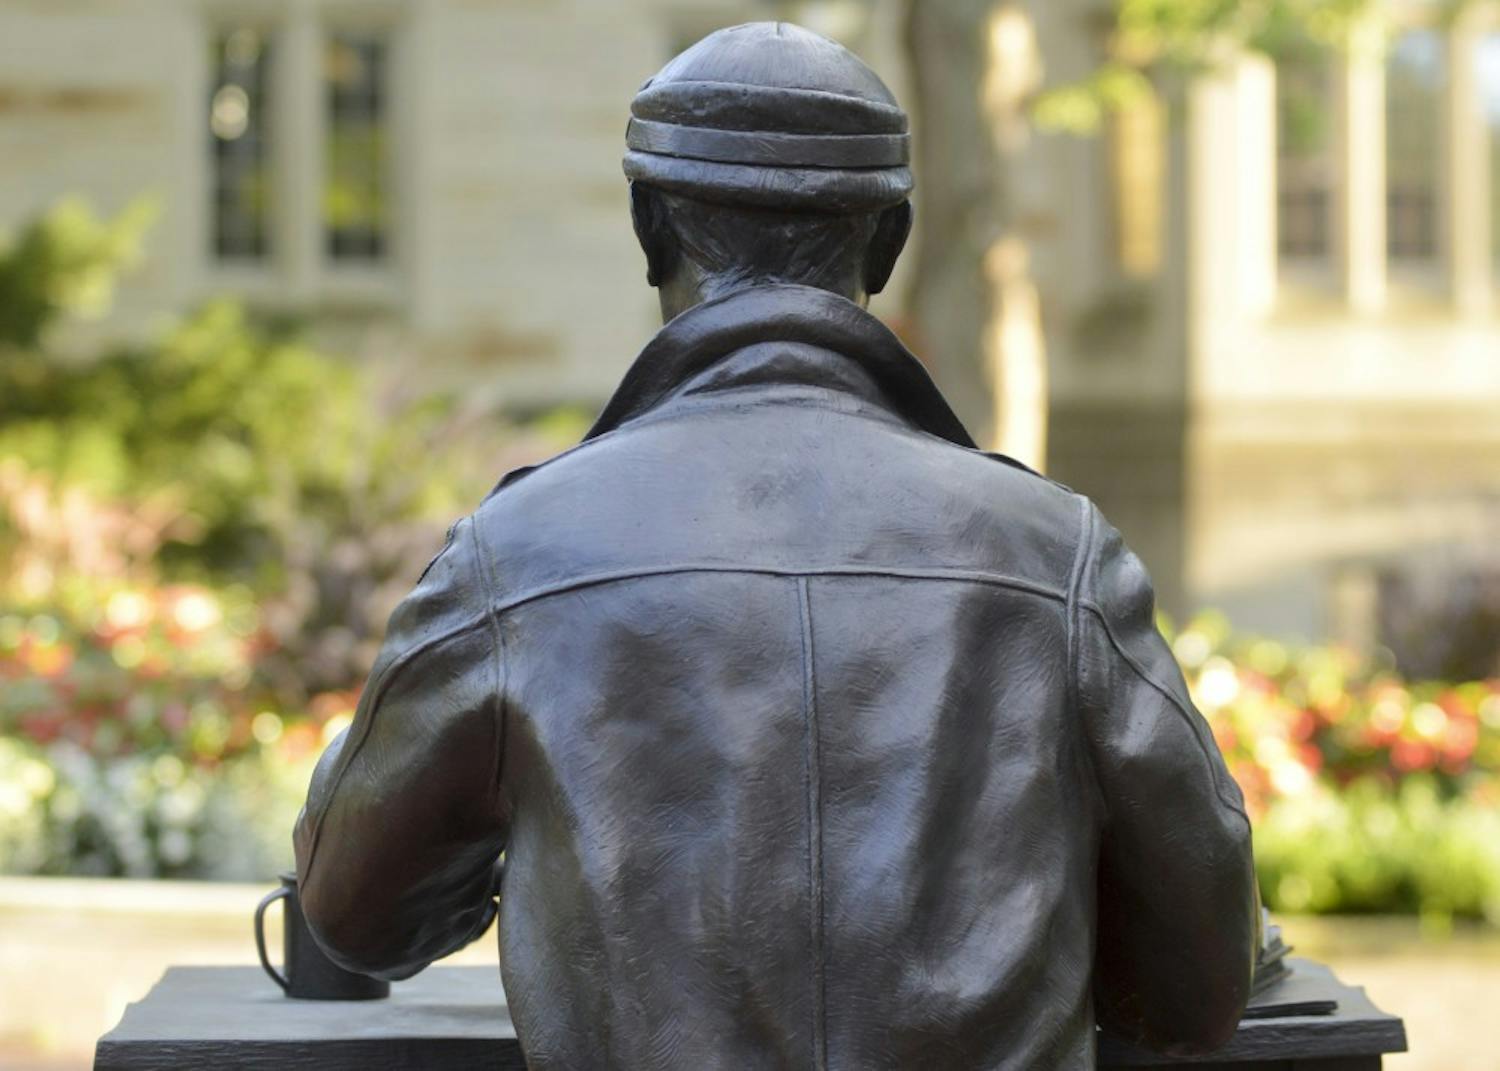 Pulitzer Prize-winning journalist Ernie Pyle sits at his typewriter outside of Franklin Hall, home of the Media School.